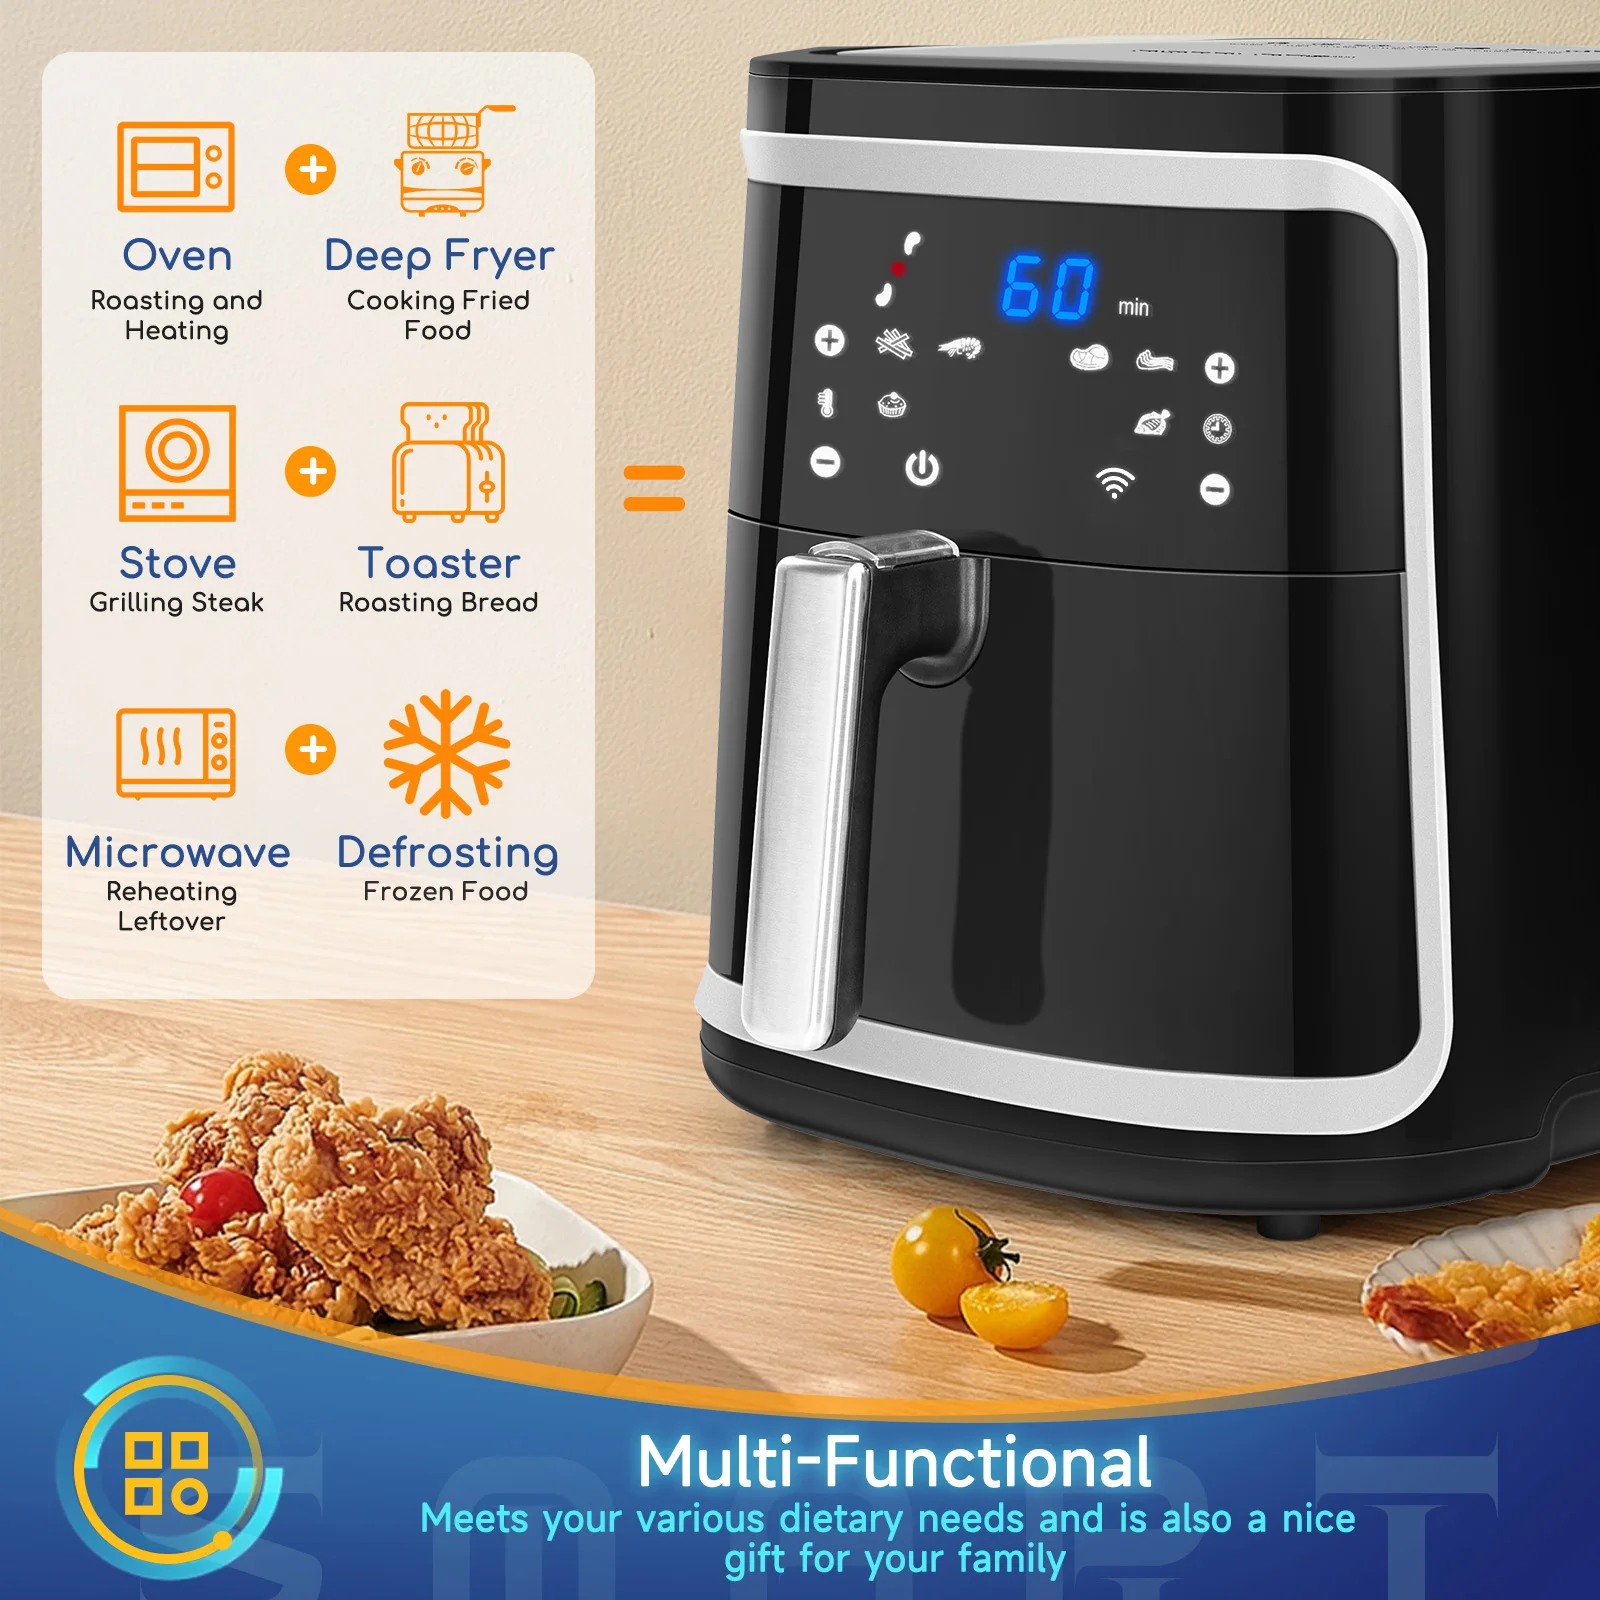 https://ae01.alicdn.com/kf/Sd5ca7f2f08c74ad0a96318a4ff1f0bacJ/7L-Smart-Oil-Free-Air-Fryer-LED-Touch-Screen-7-Preset-Keep-Warm-Manual-Mode-Removable.jpg